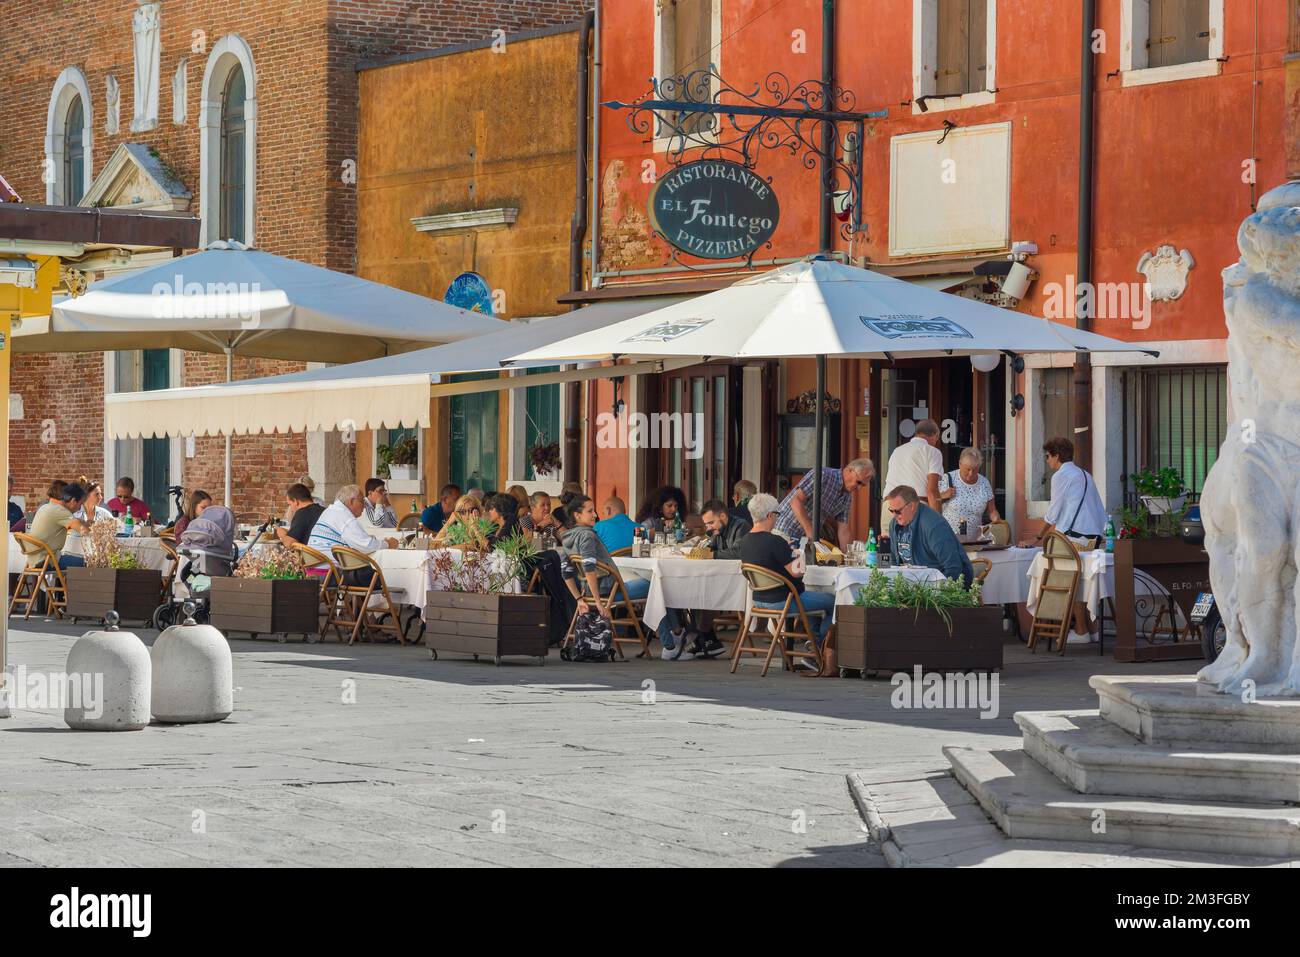 Restaurant piazza Italy, view in summer of a group of people dining outside a pizzeria in the scenic port of Chioggia, Comune of Venice, Italy Stock Photo